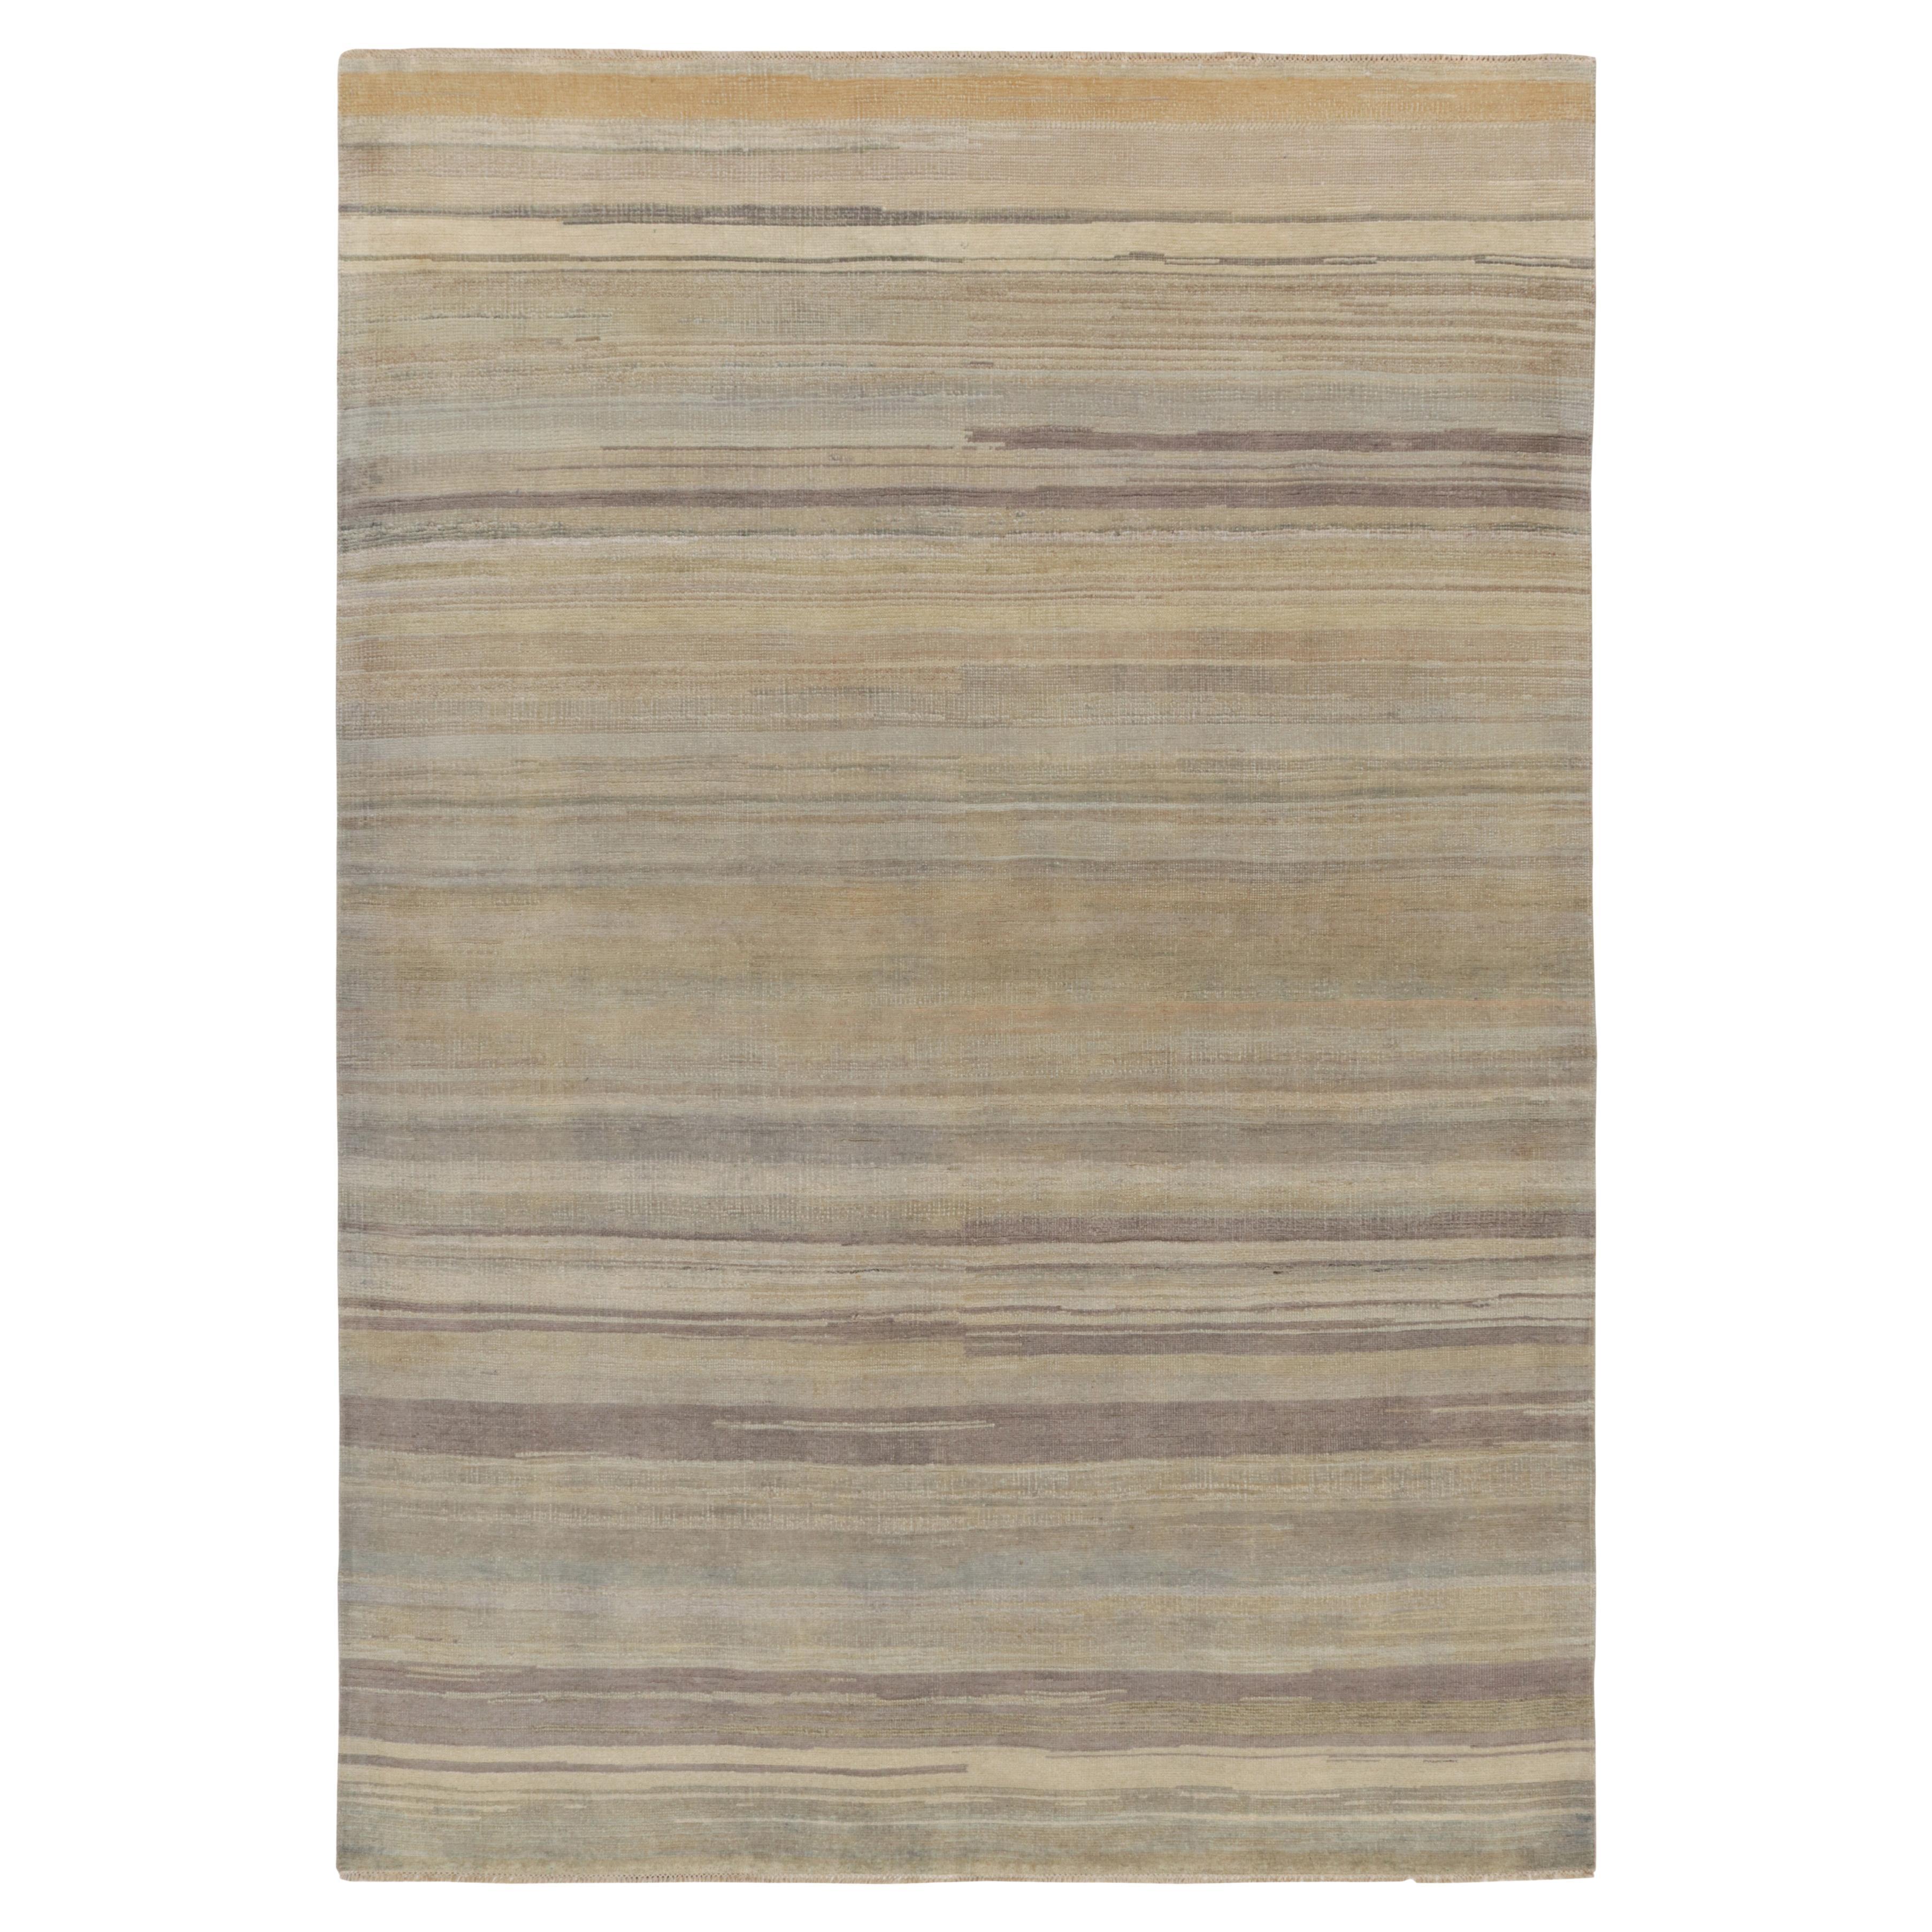 Rug & Kilim’s Modern Textural Rug in Beige, Gray and Blue Stripes and Striae